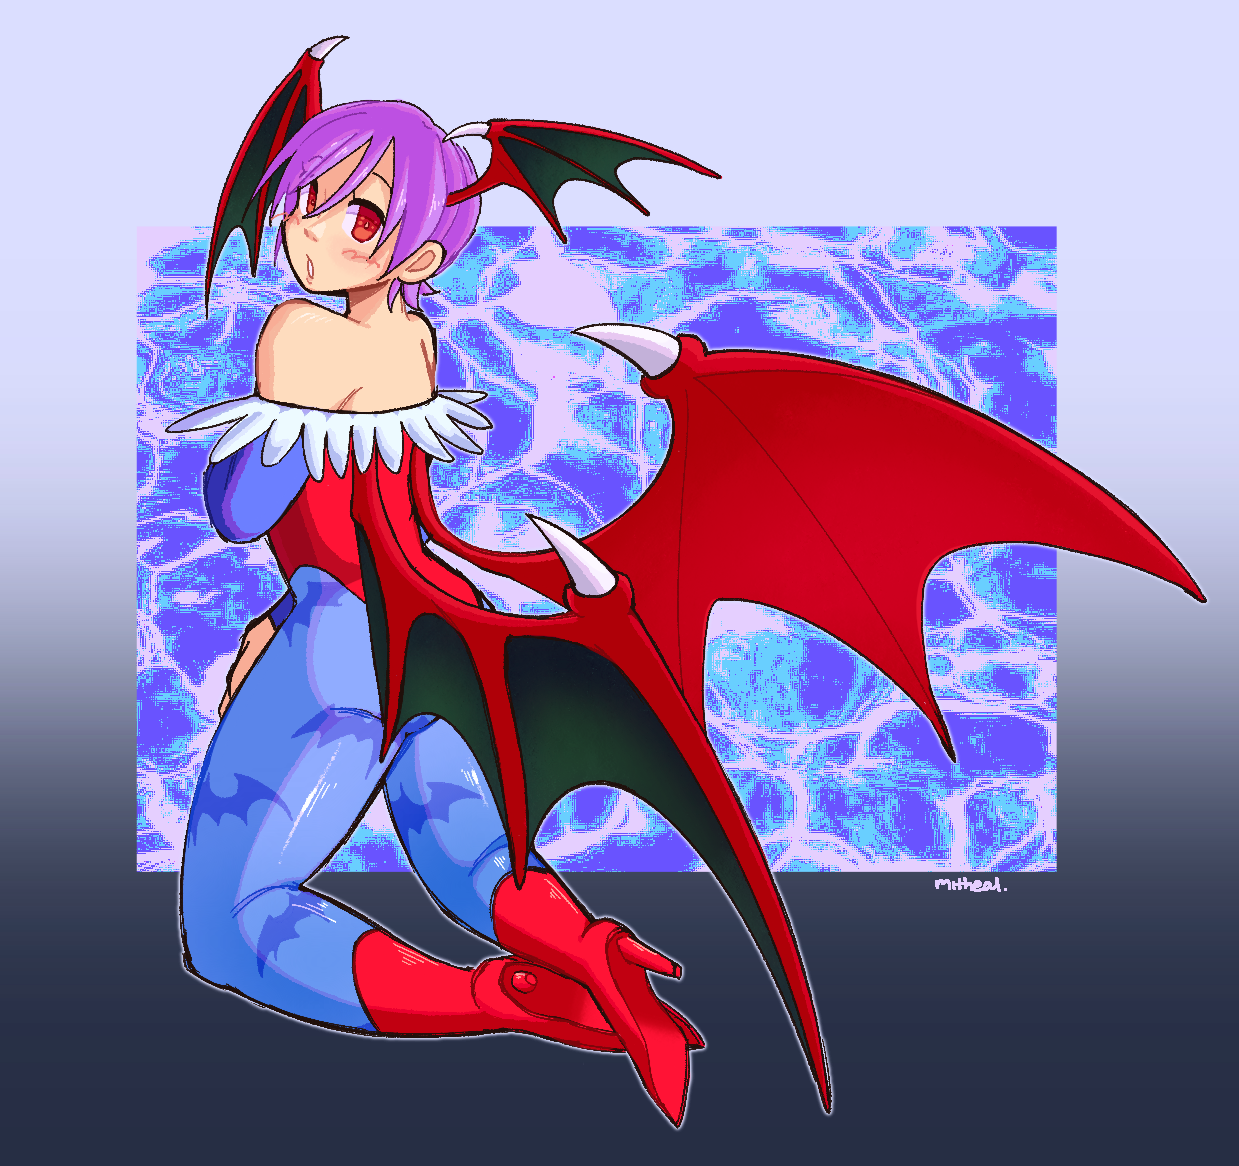 Fanart of Lilith from Darkstalkers.